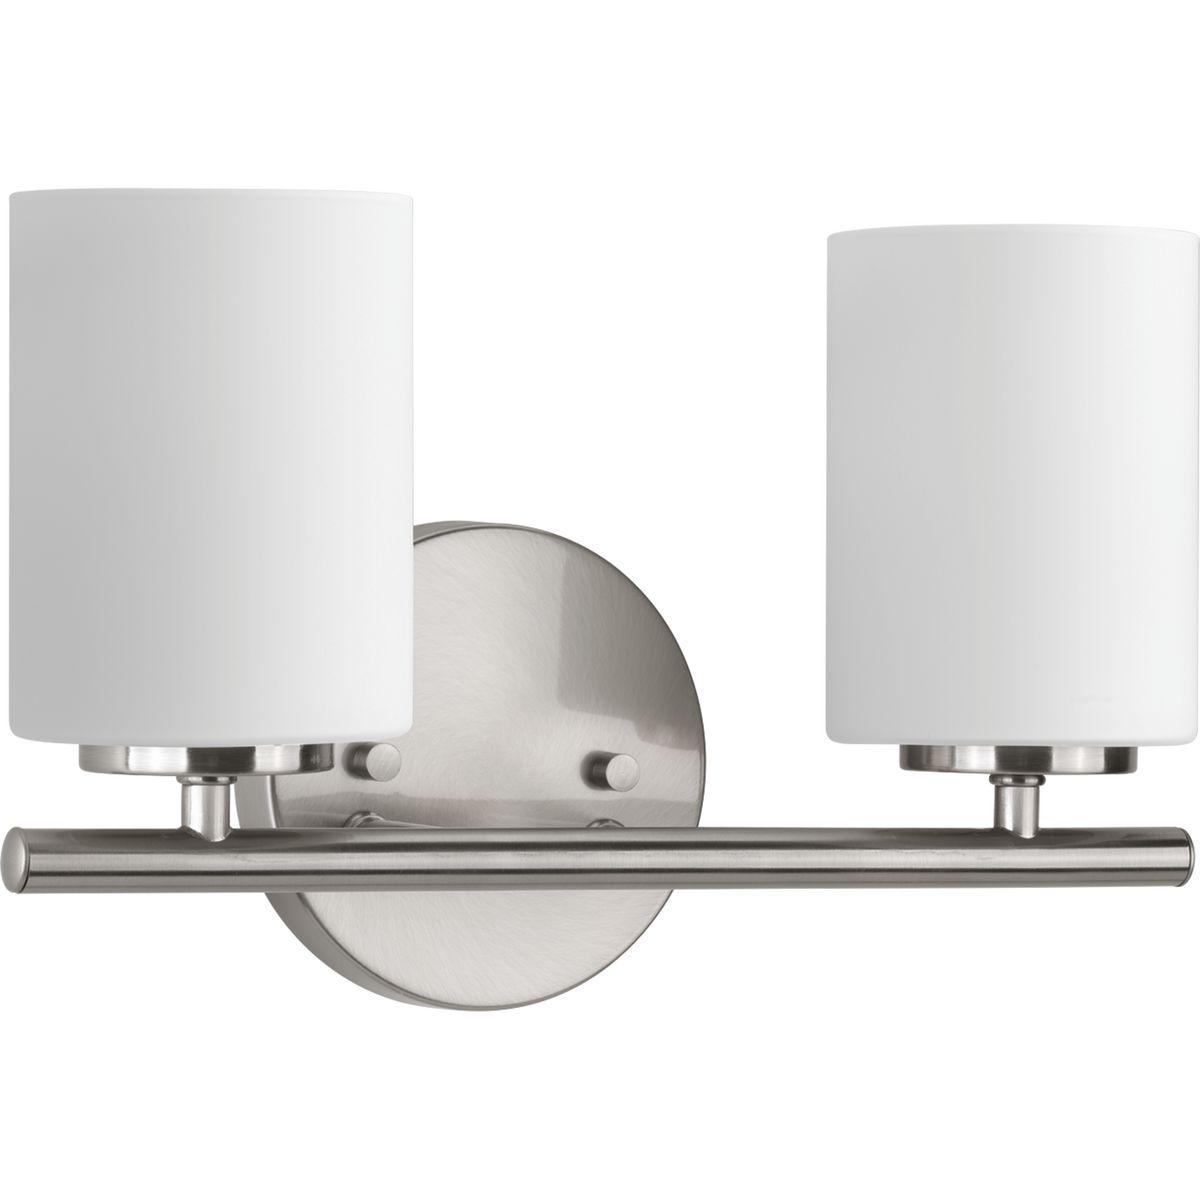 Hubbell P2158-09 Two-light bath & vanity from the Replay Collection, smooth forms, linear details and a pleasingly elegant frame enhance a simplified modern look. Fixture can be mounted up or down. Brushed Nickel finish.  ; Ideal for a bathroom and powder room. ; Perfect 